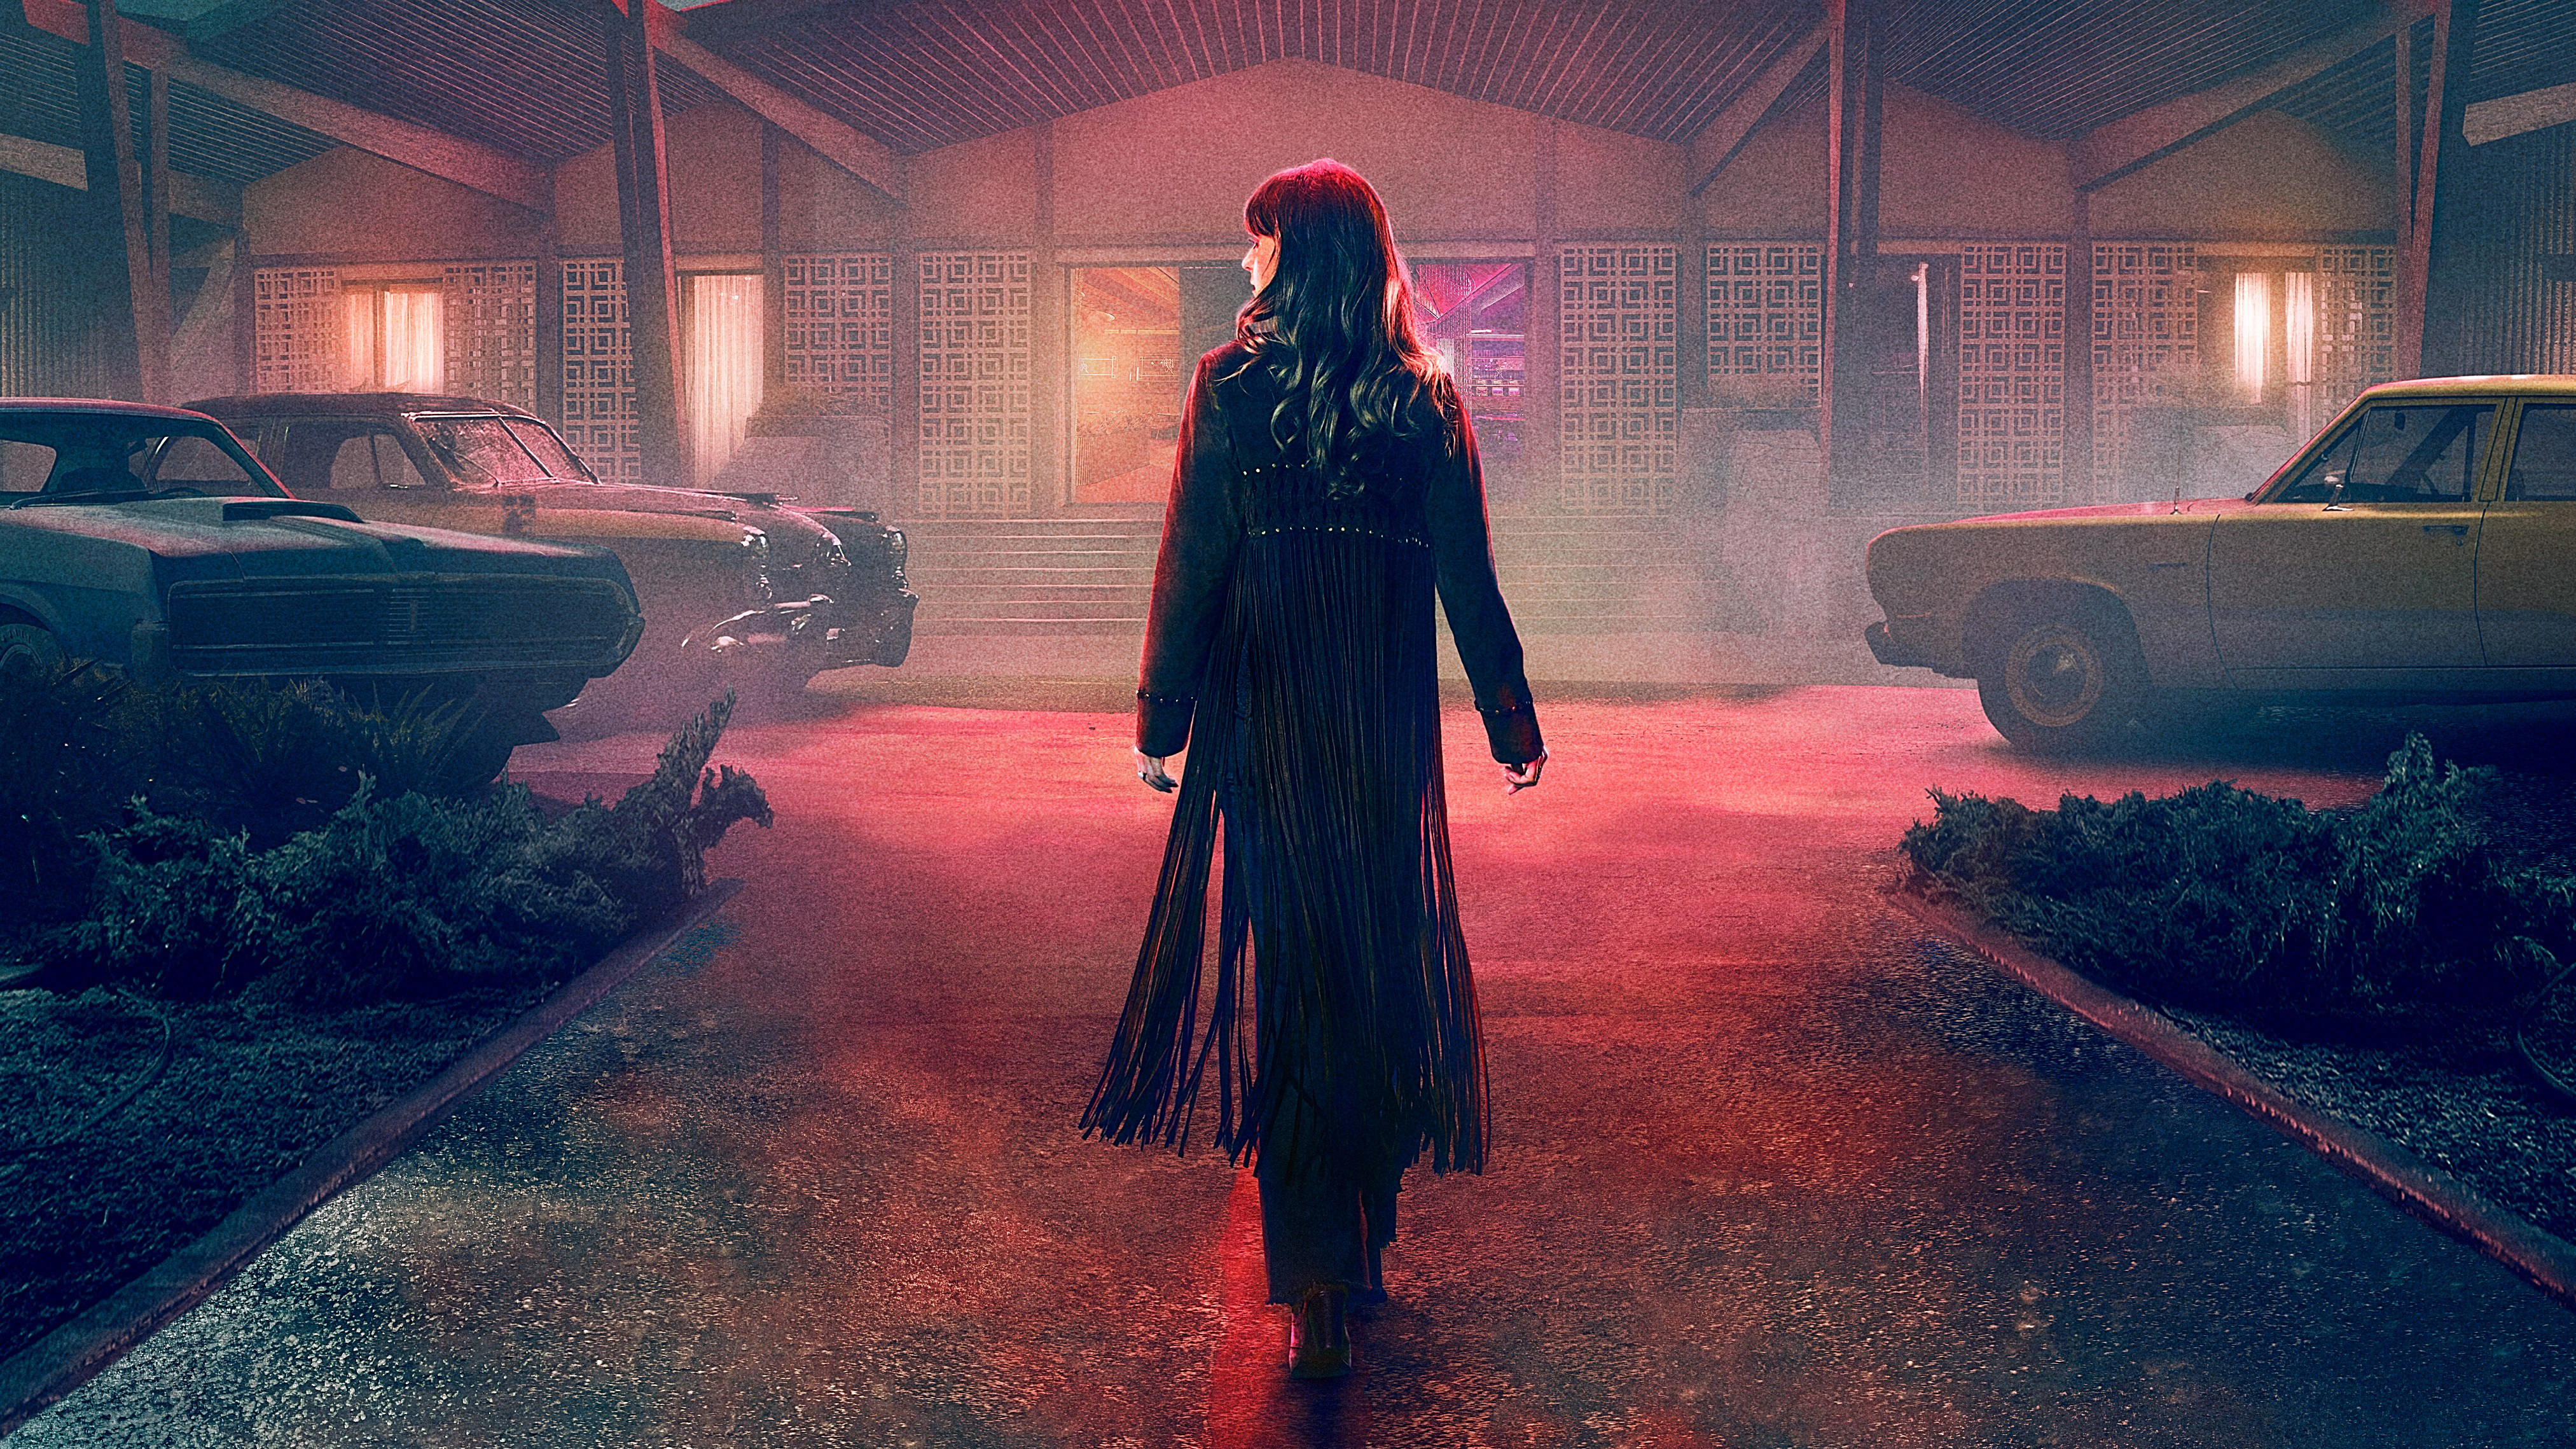 Dakota Johnson in Bad Times at the El Royale 2018 Wallpapers